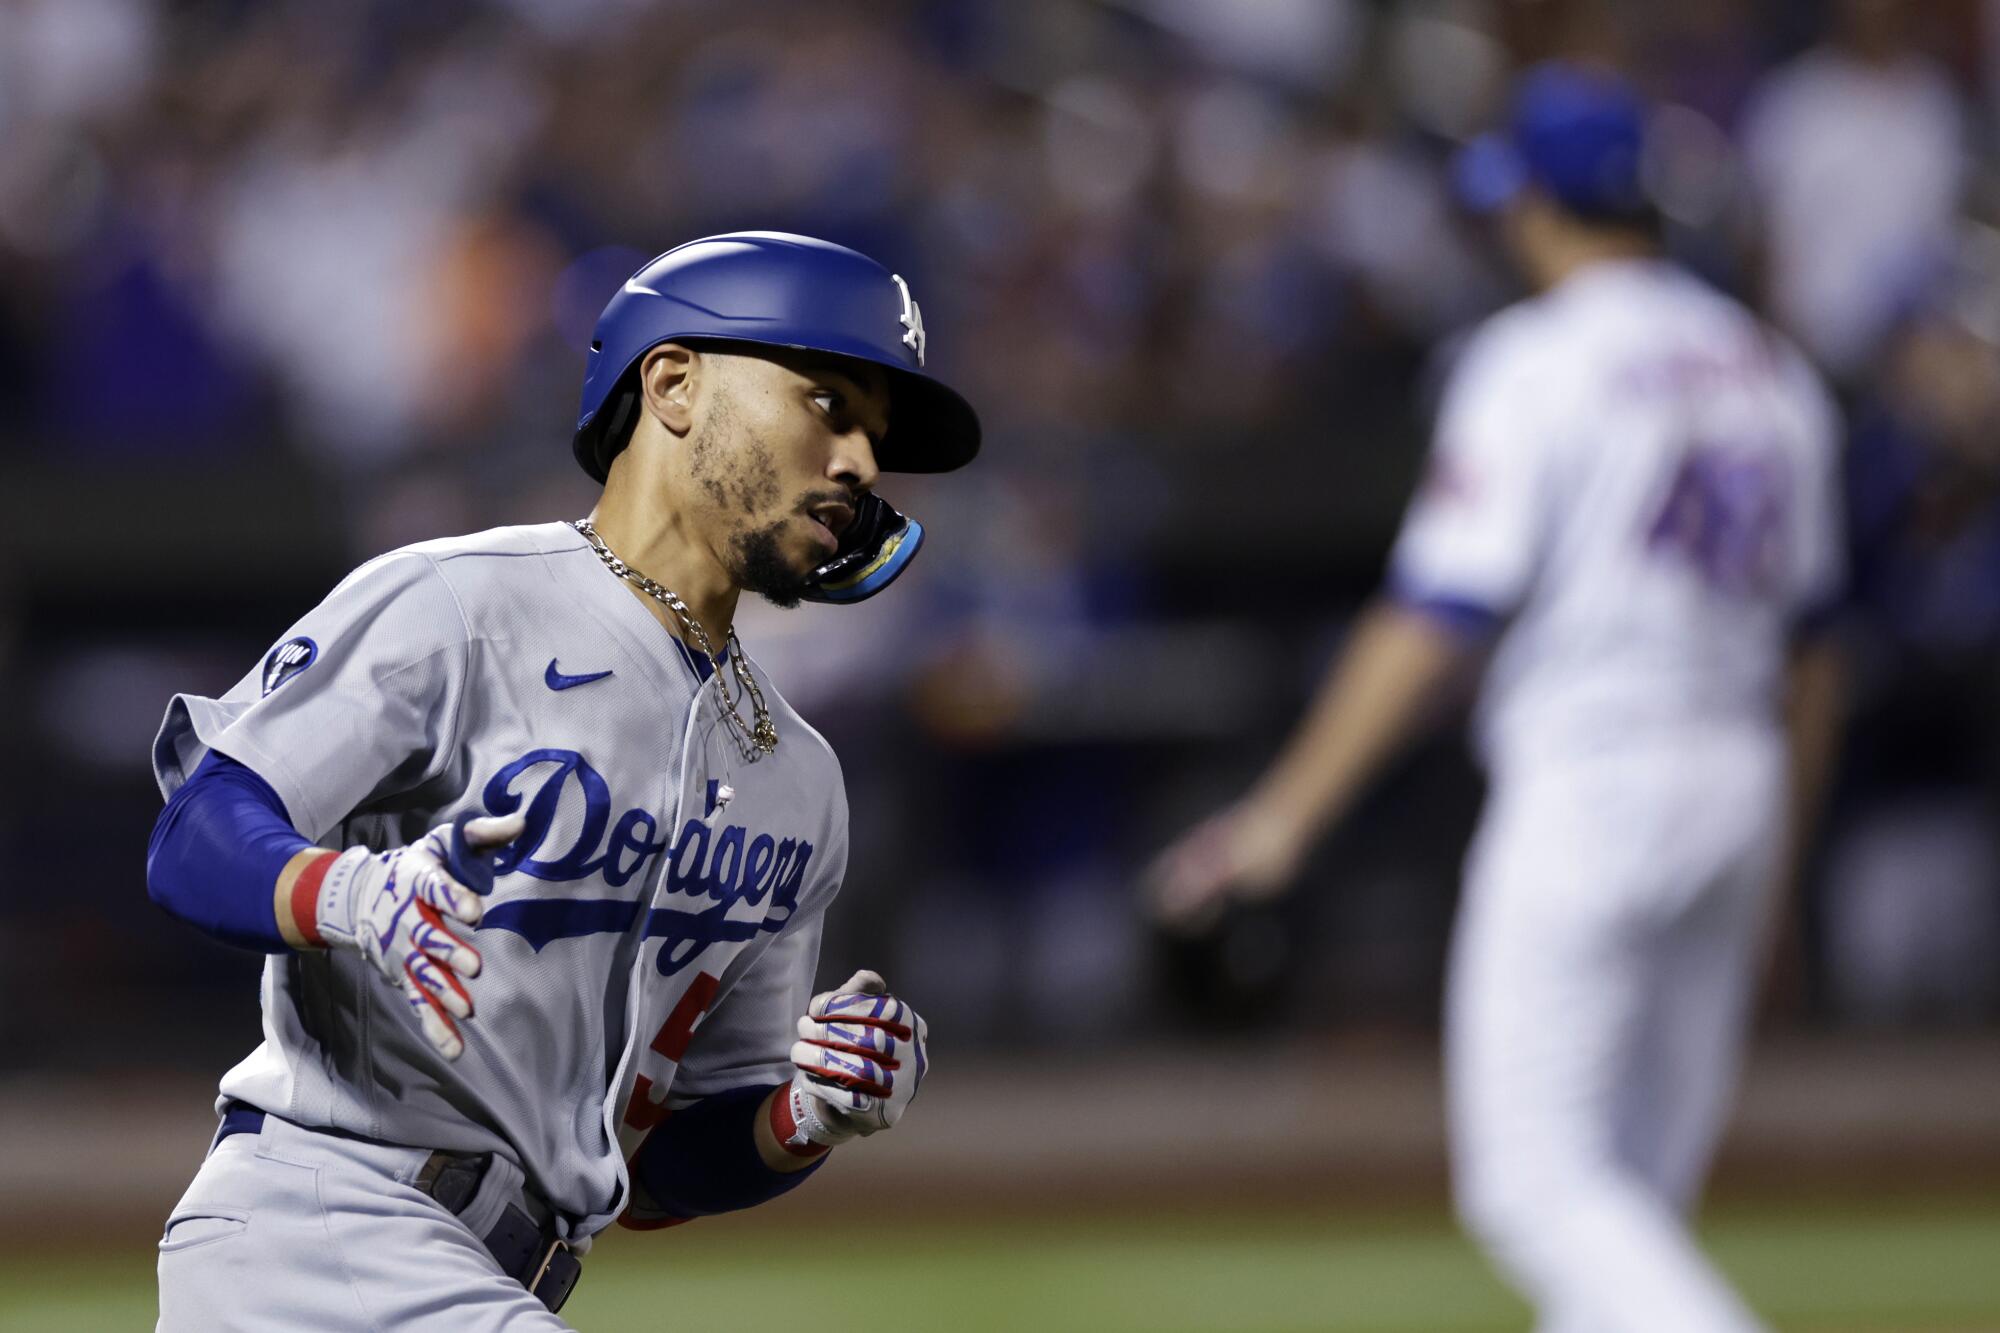 Mookie Betts hit a home run, but the Dodgers lost to the Mets on Wednesday. (AP Photo/Adam Hunger)